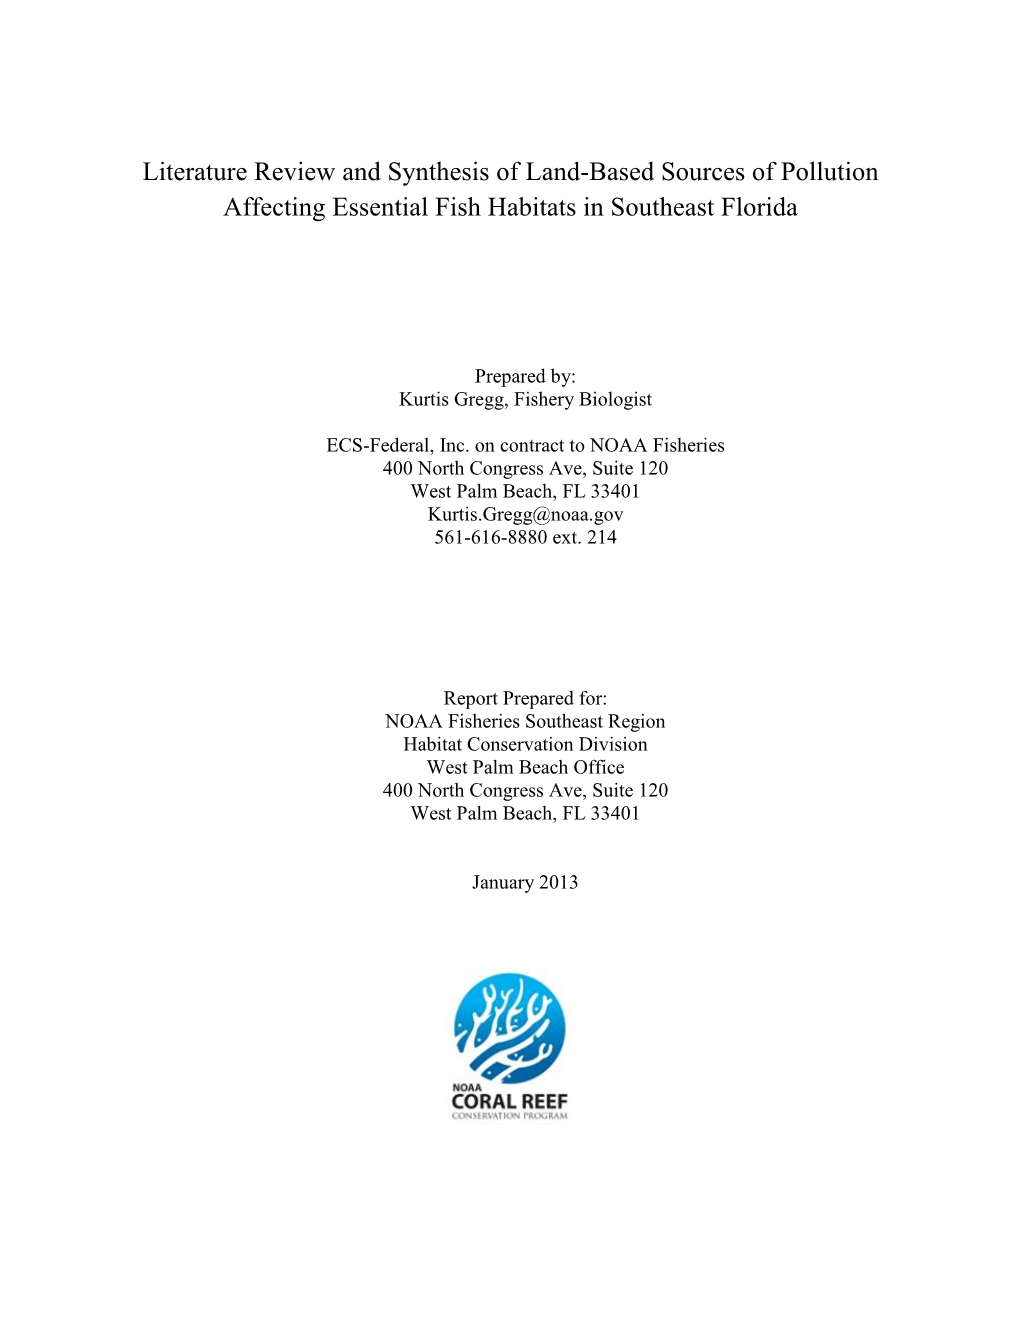 Literature Review and Synthesis of LBSP in Southeast Florida